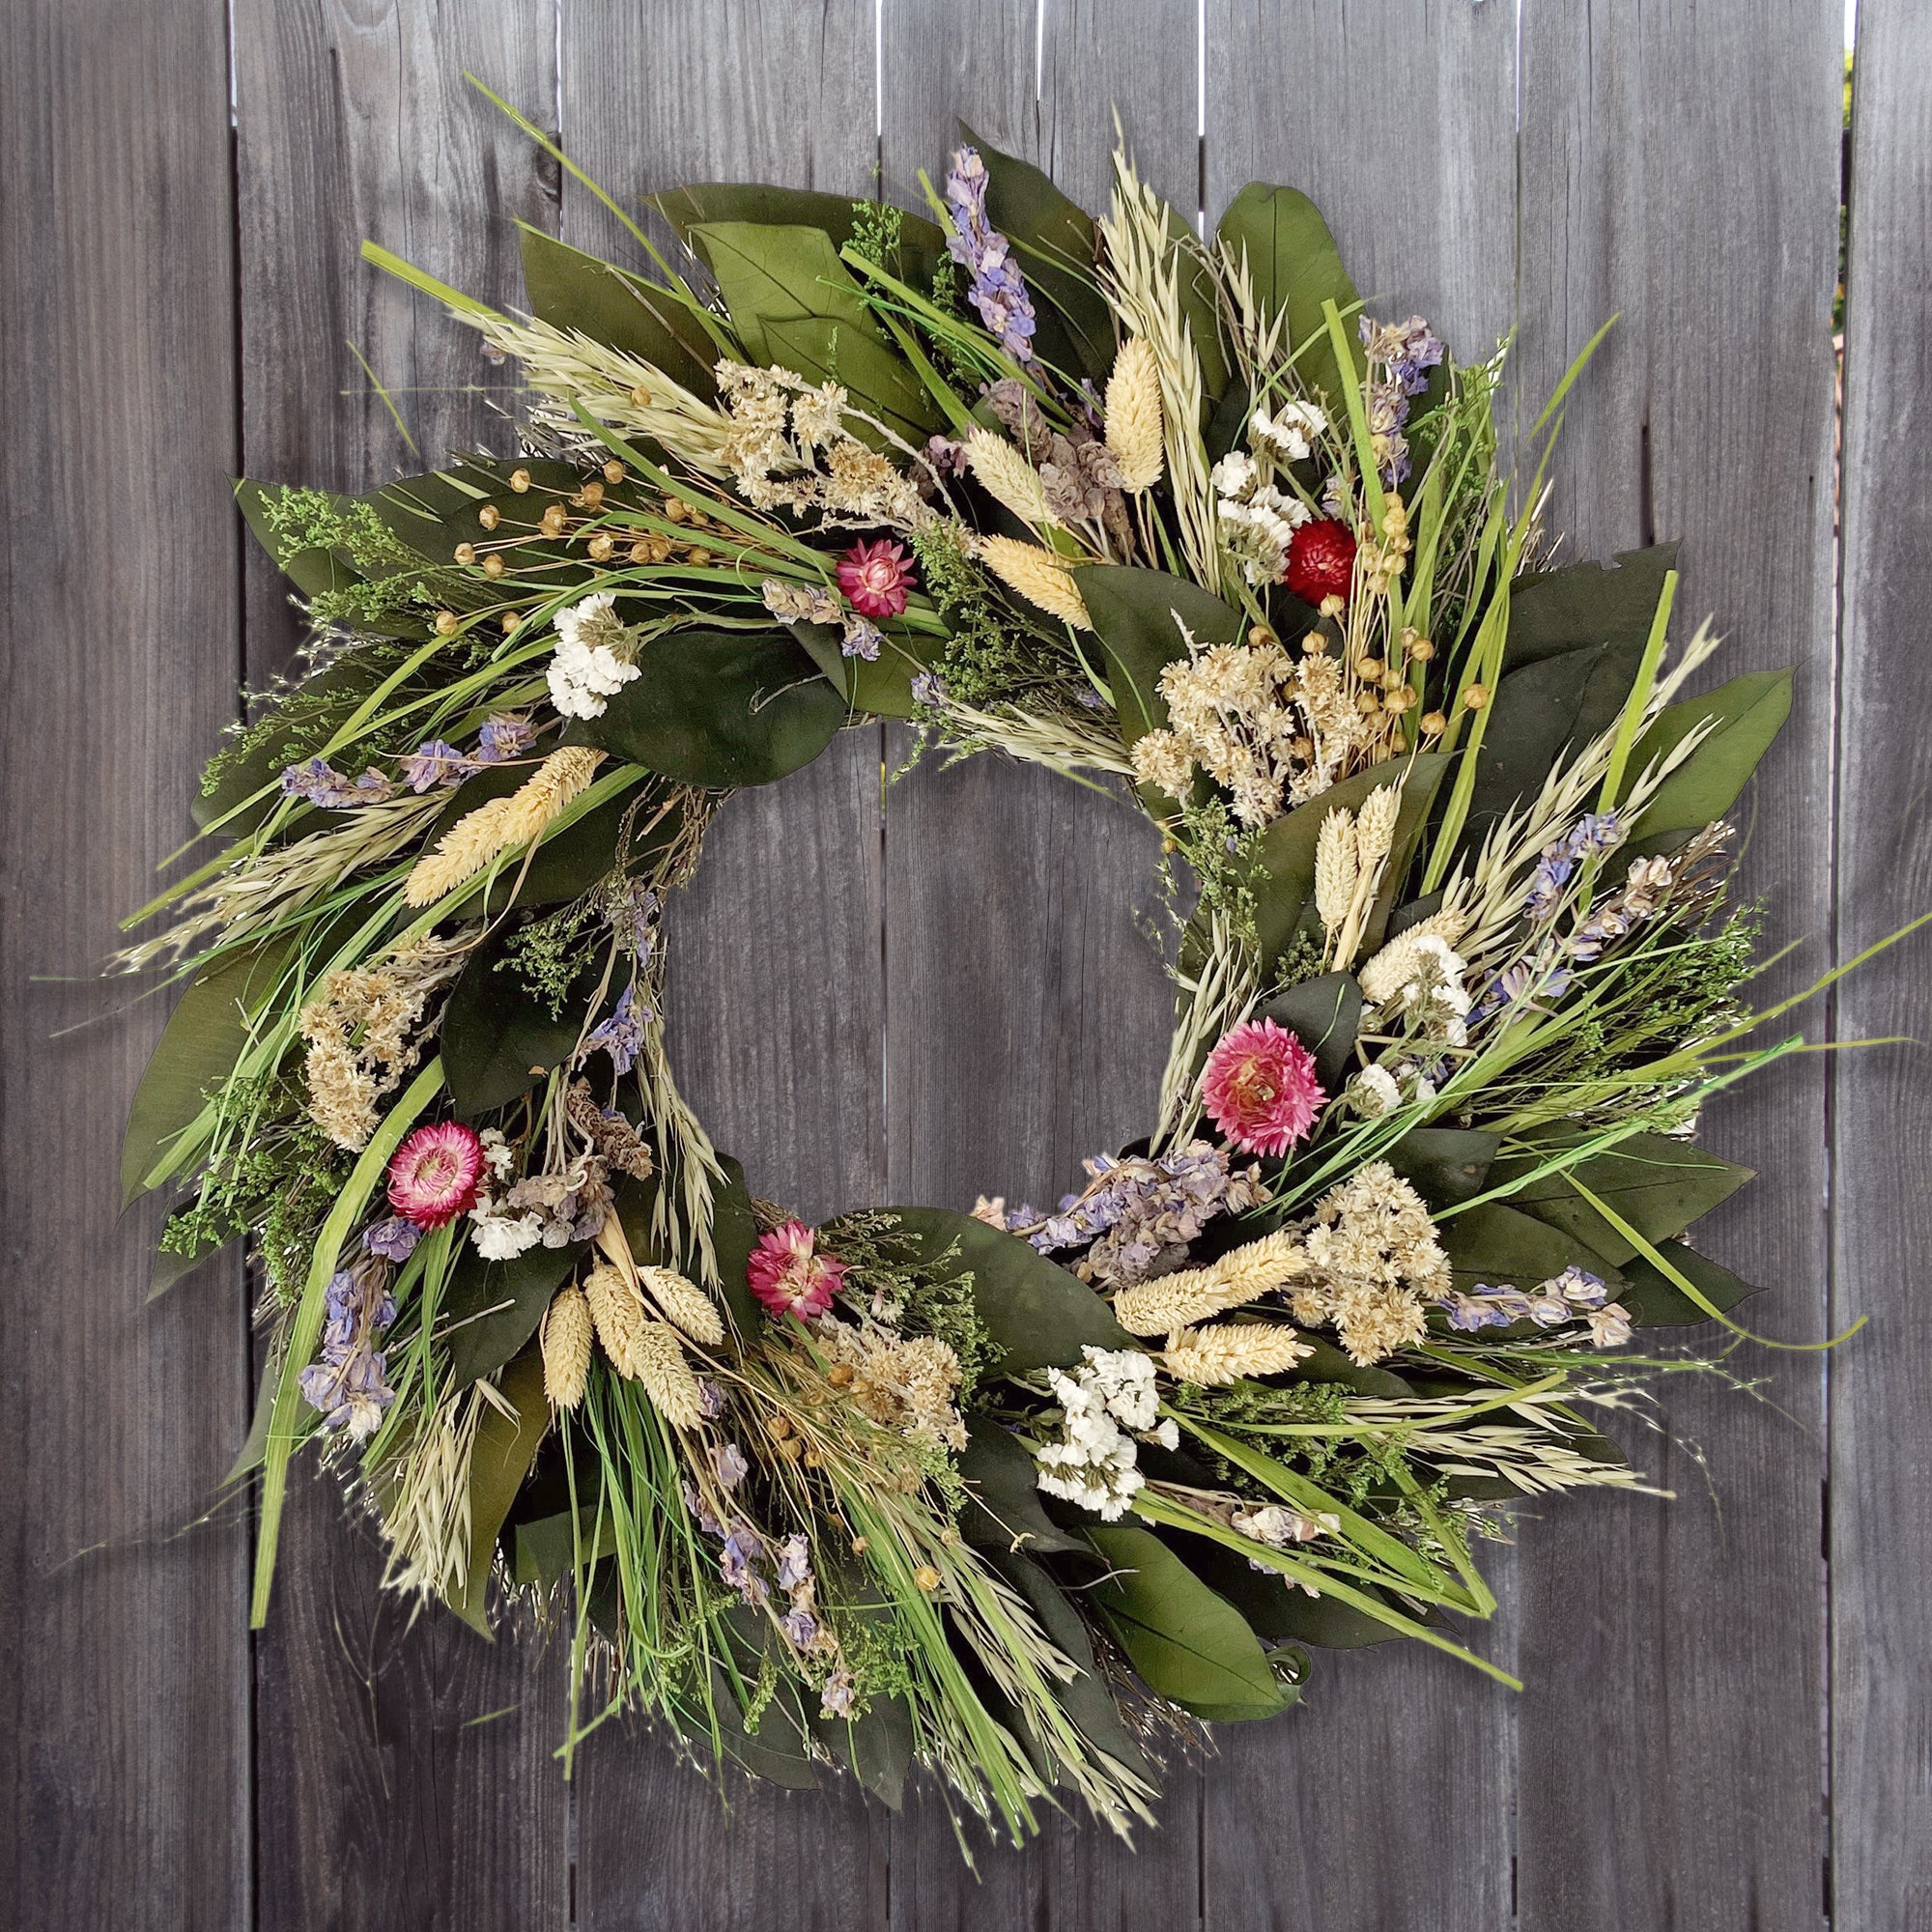 Prairie wreath made from dried flowers in pink, lavender, and white, and natural grains and green leaves.